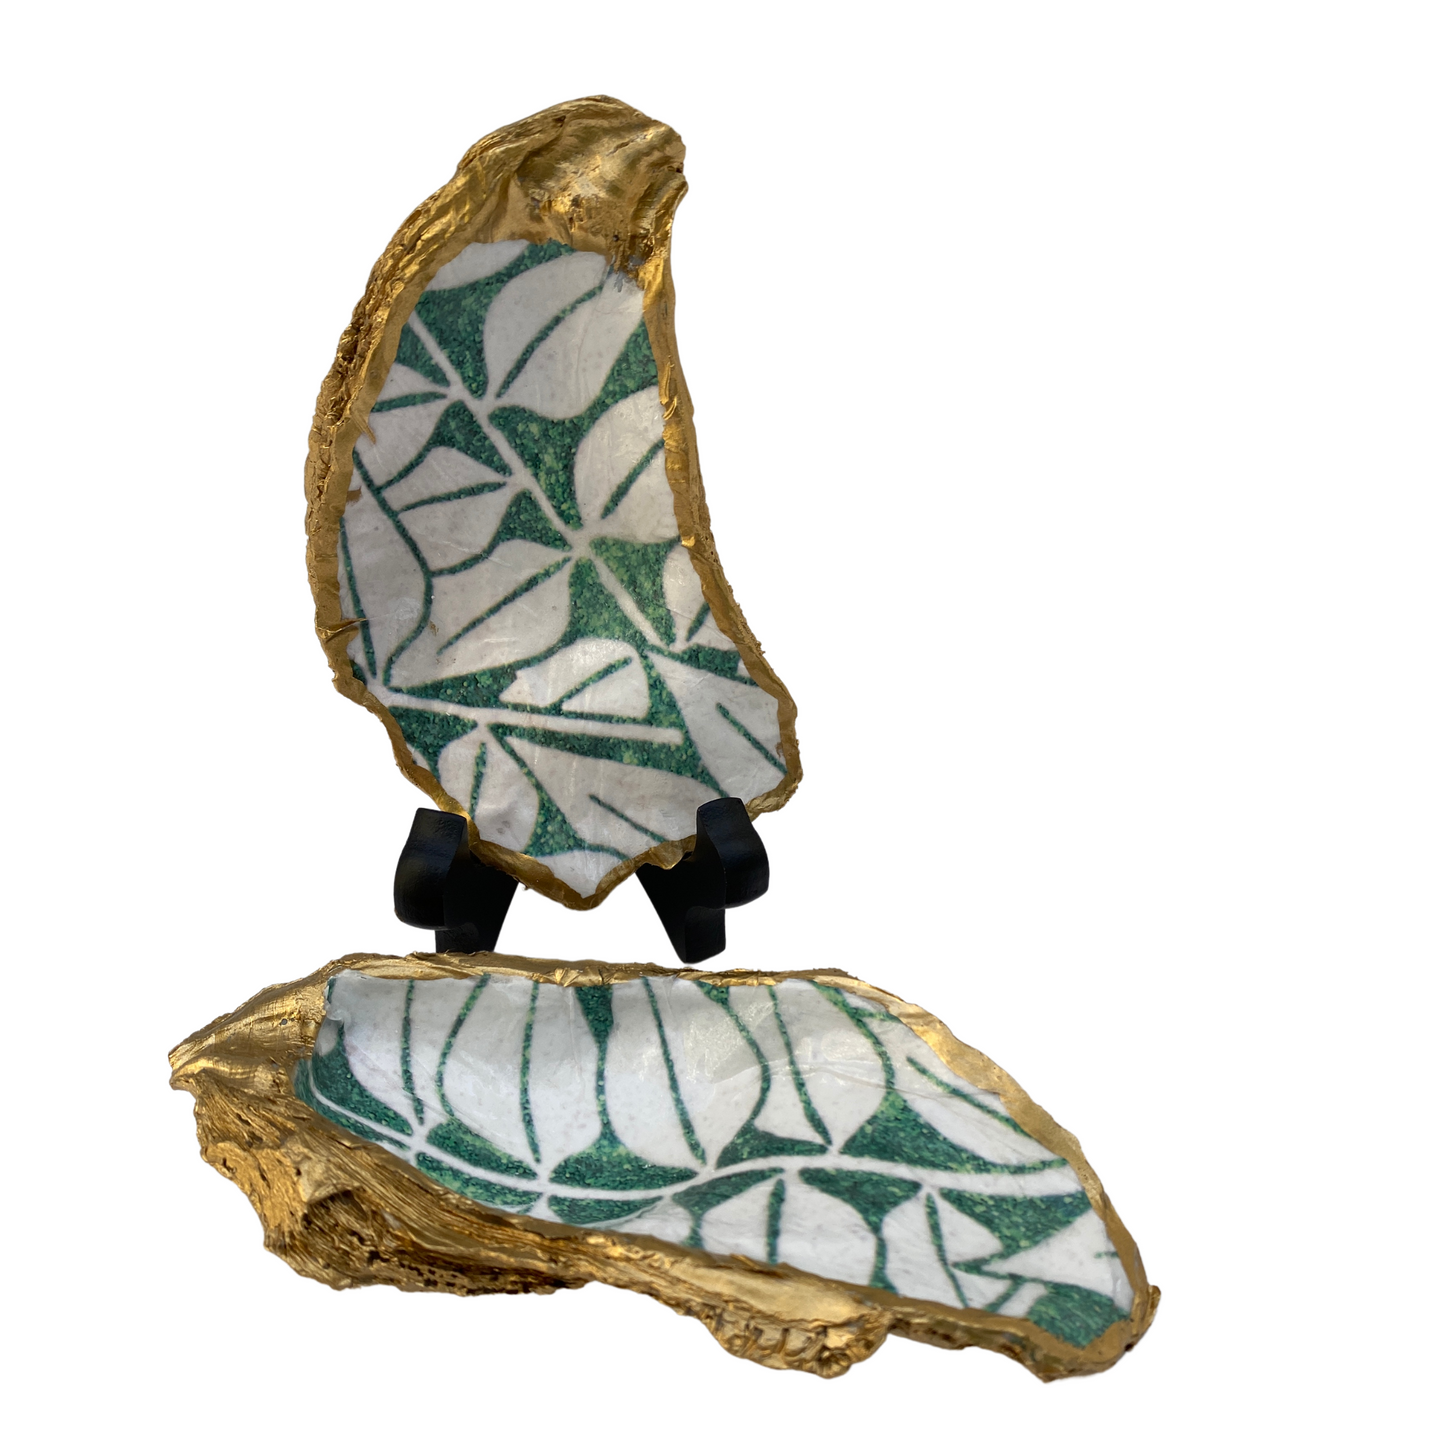 Oyster Shell Art, William Morris Inspired, Green and White Leaf Design